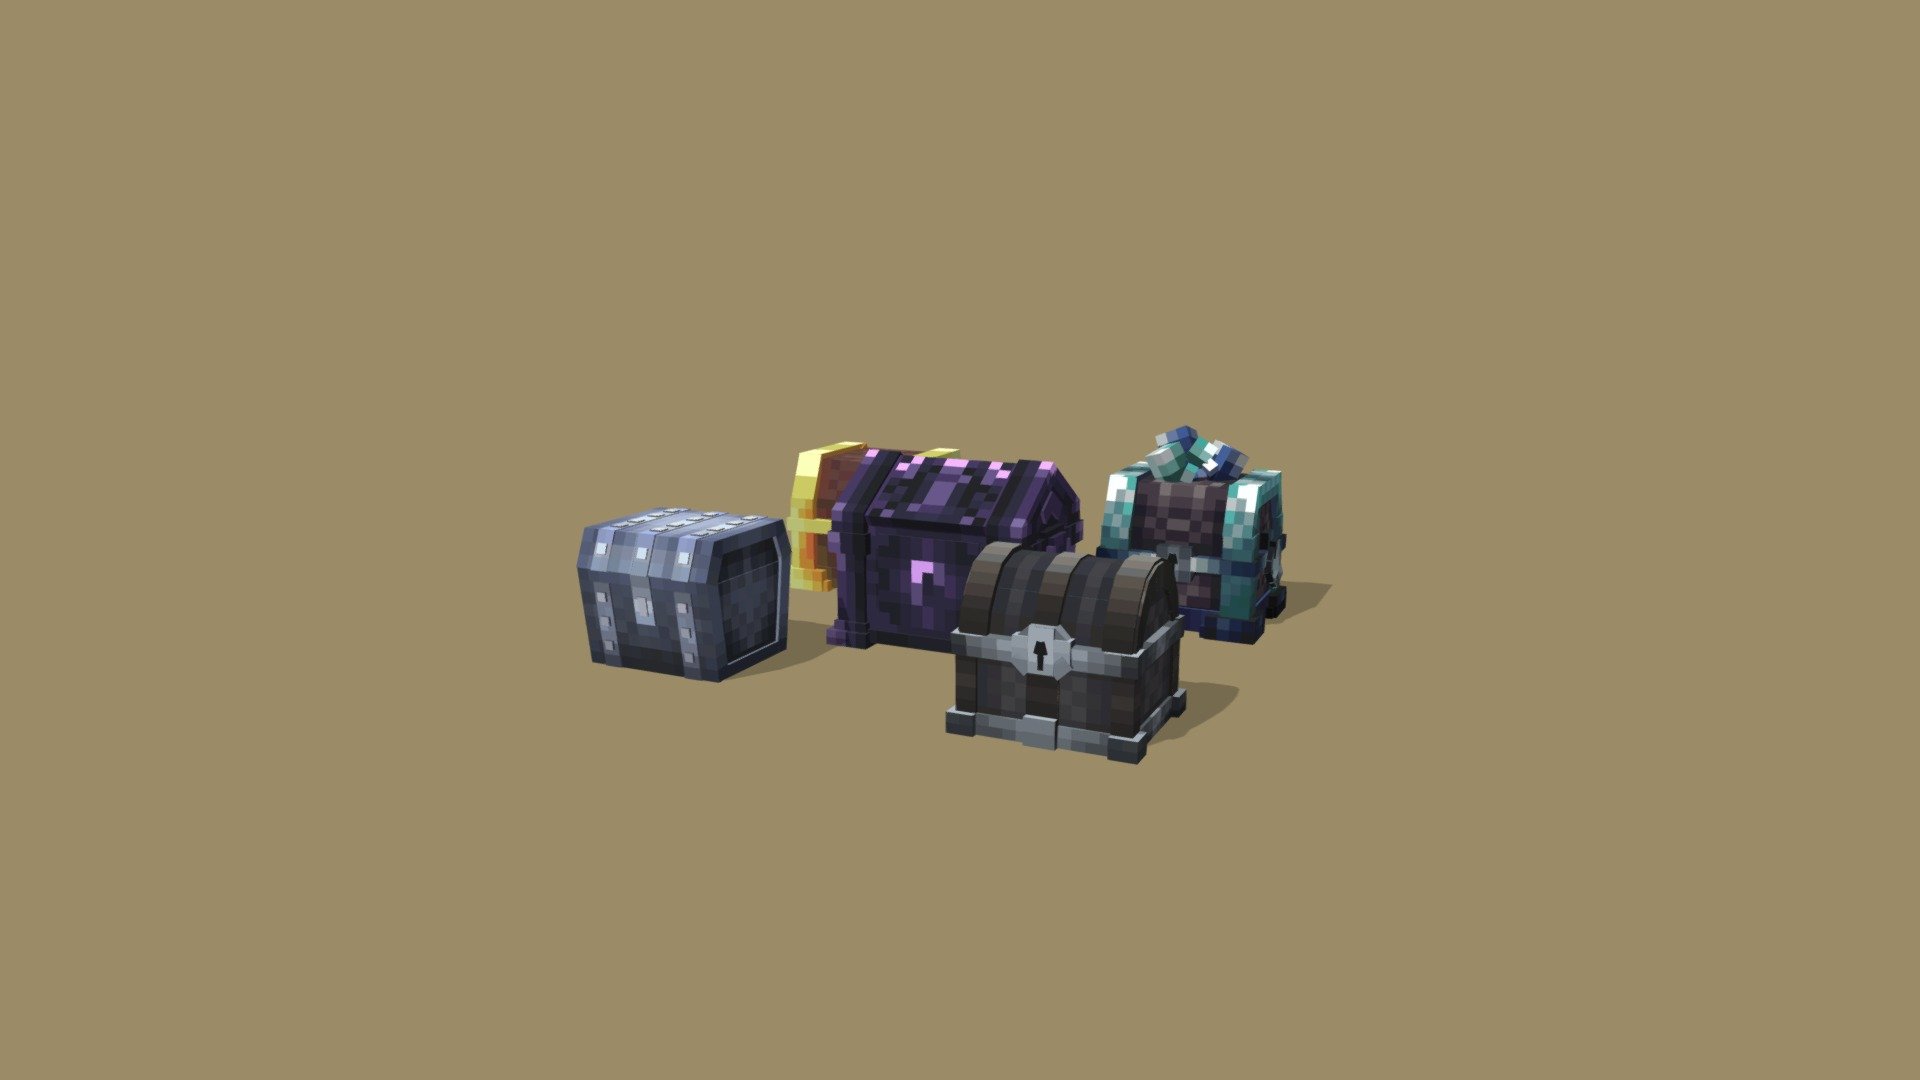 a chest set consist of five different textures, made by blockbench - Chests set - 3D model by yxdzy歪叉 (@yxdzy) 3d model